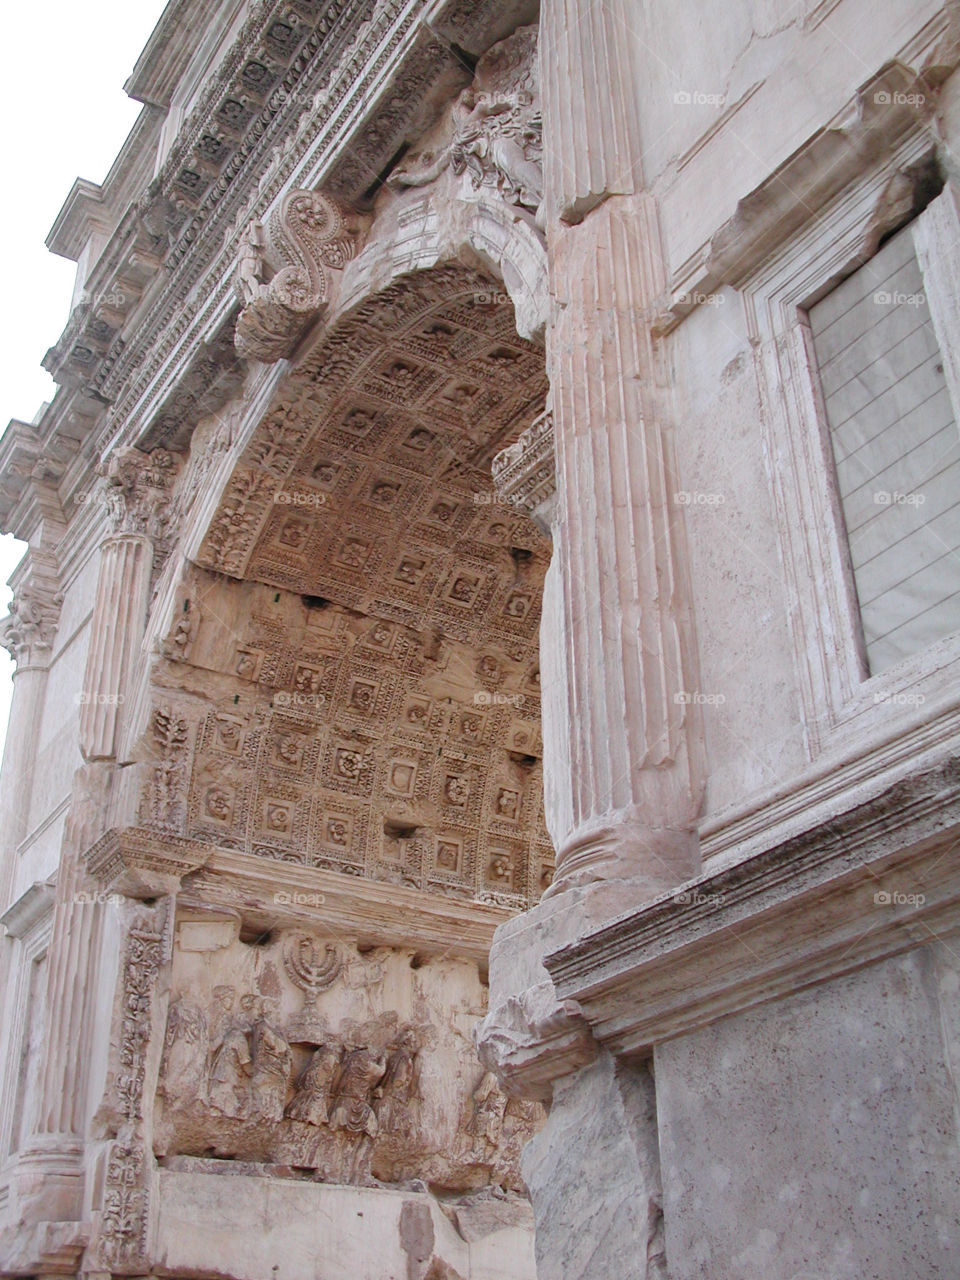 Arch of Titus. The arch is located in Rome near the colosseum 